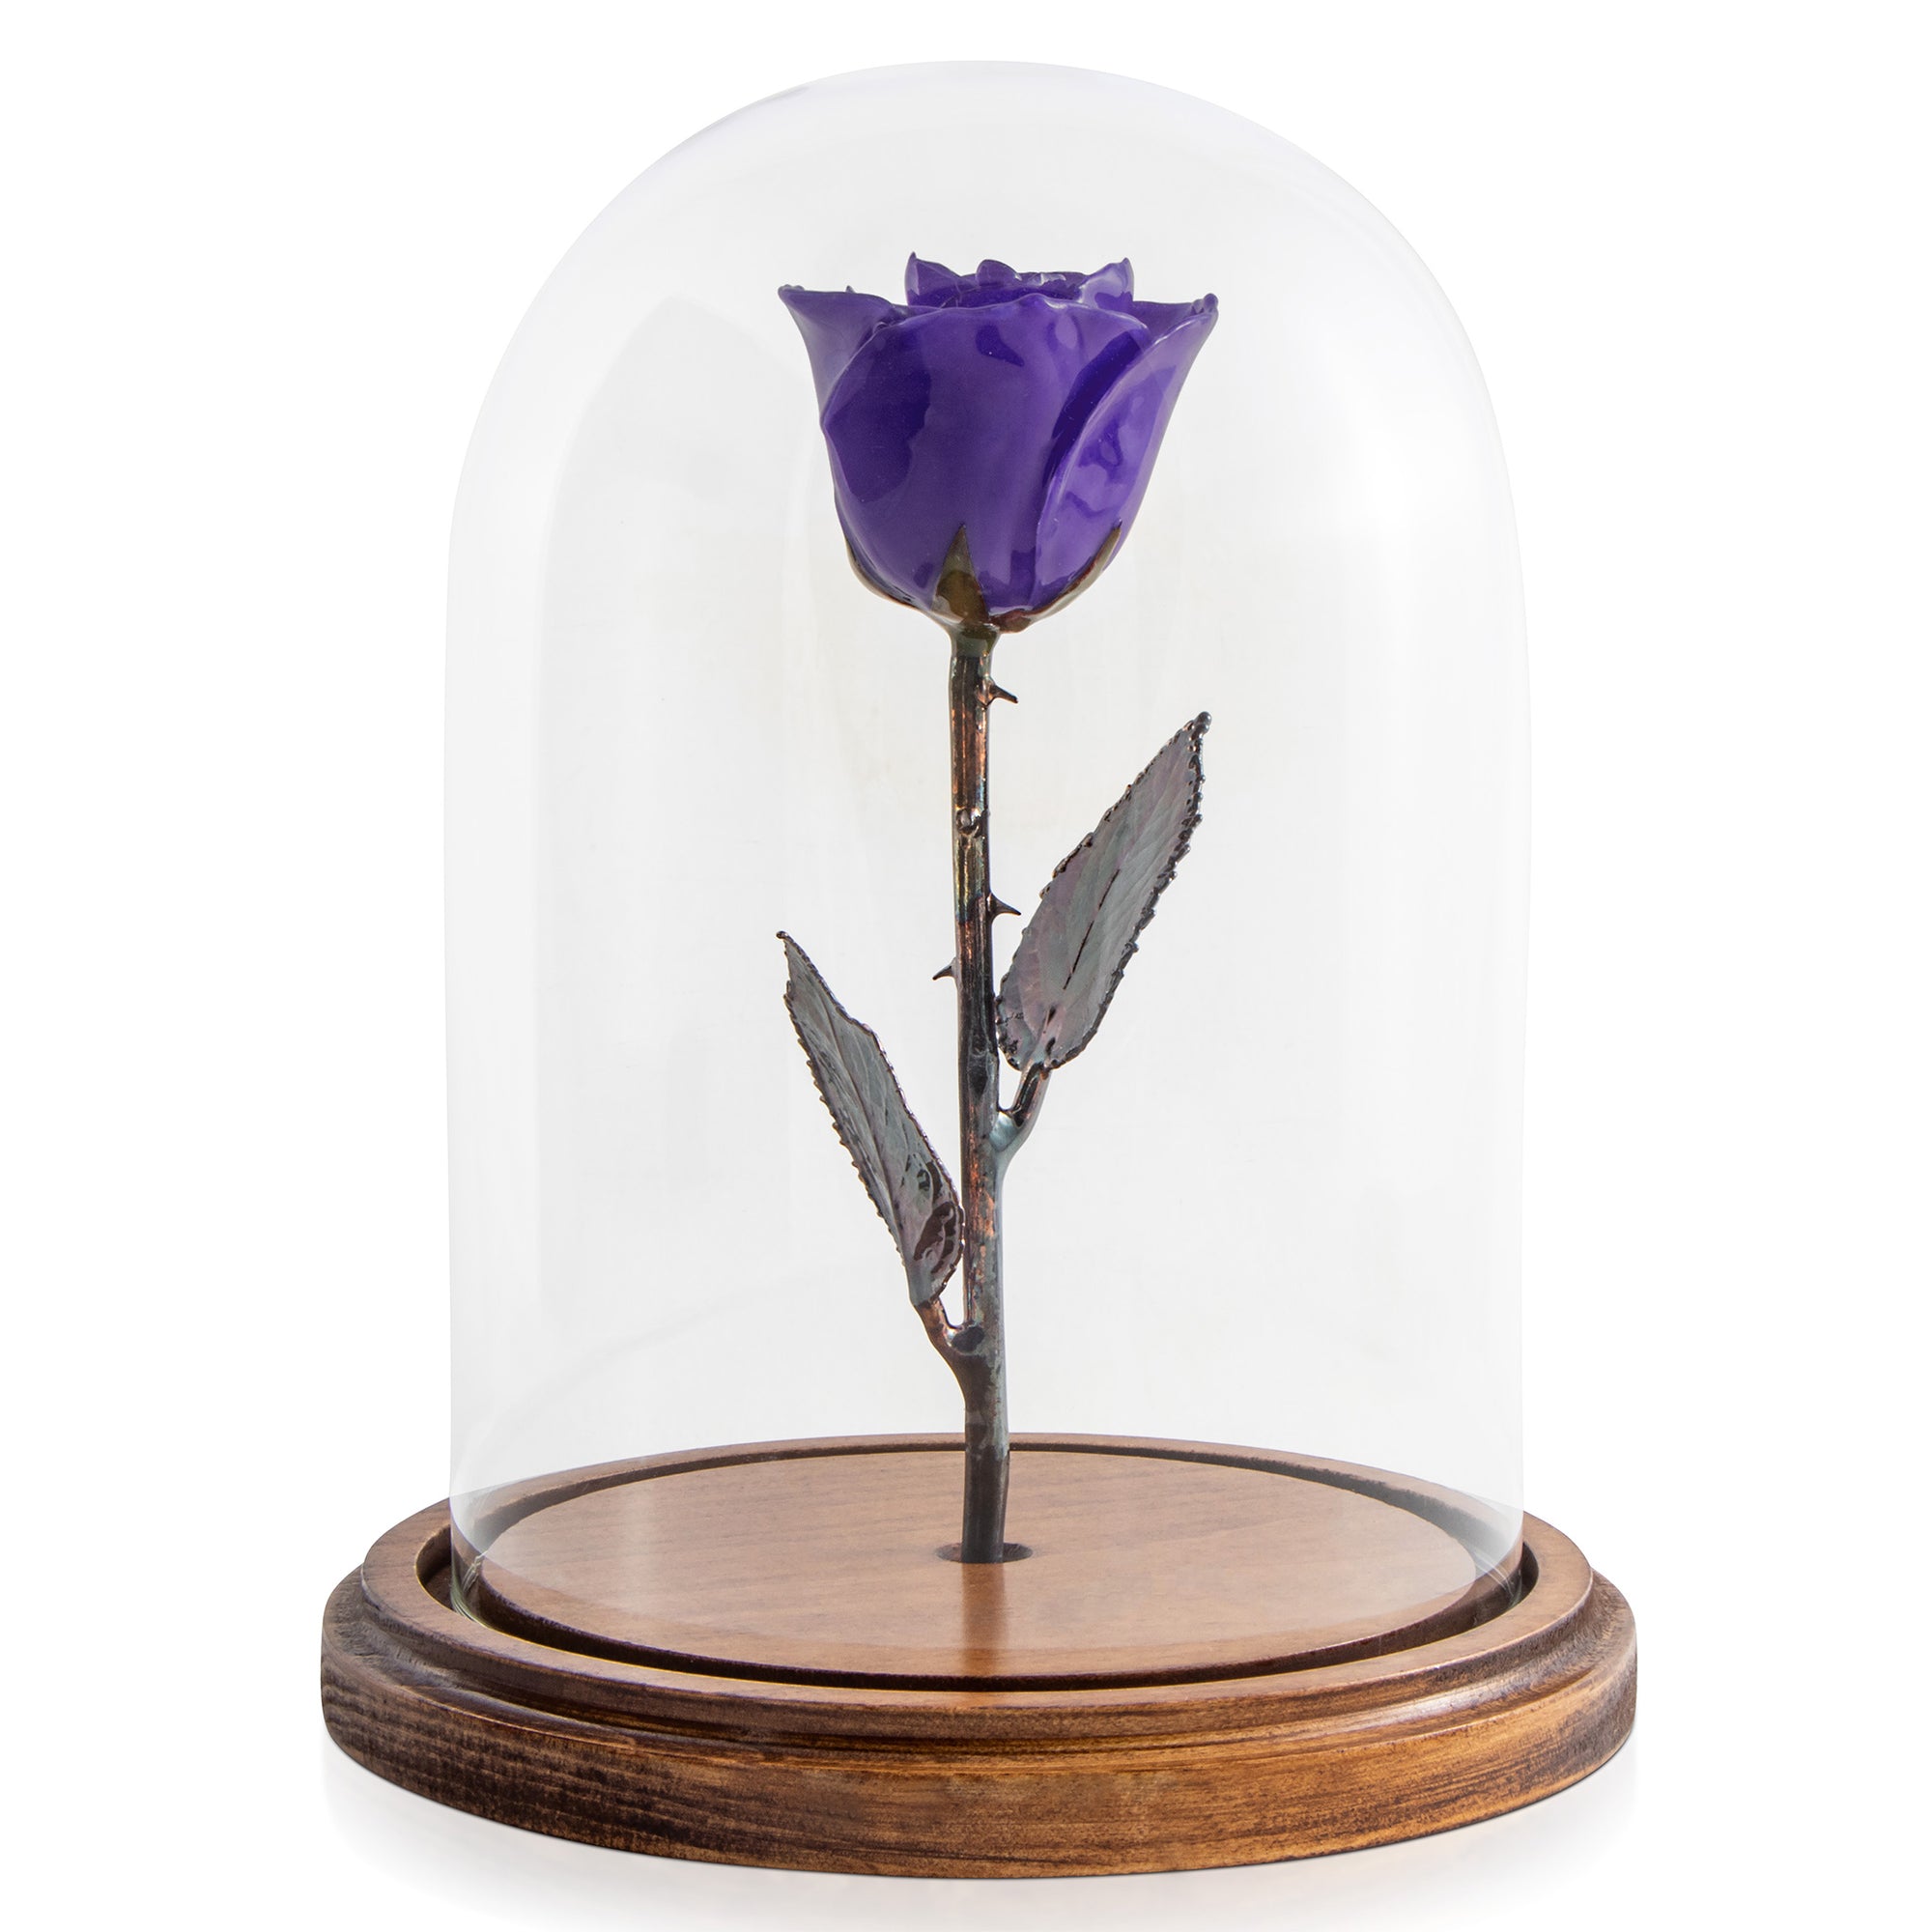 Purple Enchanted Rose (aka Beauty & The Beast Rose) with Patina Copper Stem Mounted to A Hand Turned Solid Wood Base under a glass dome.